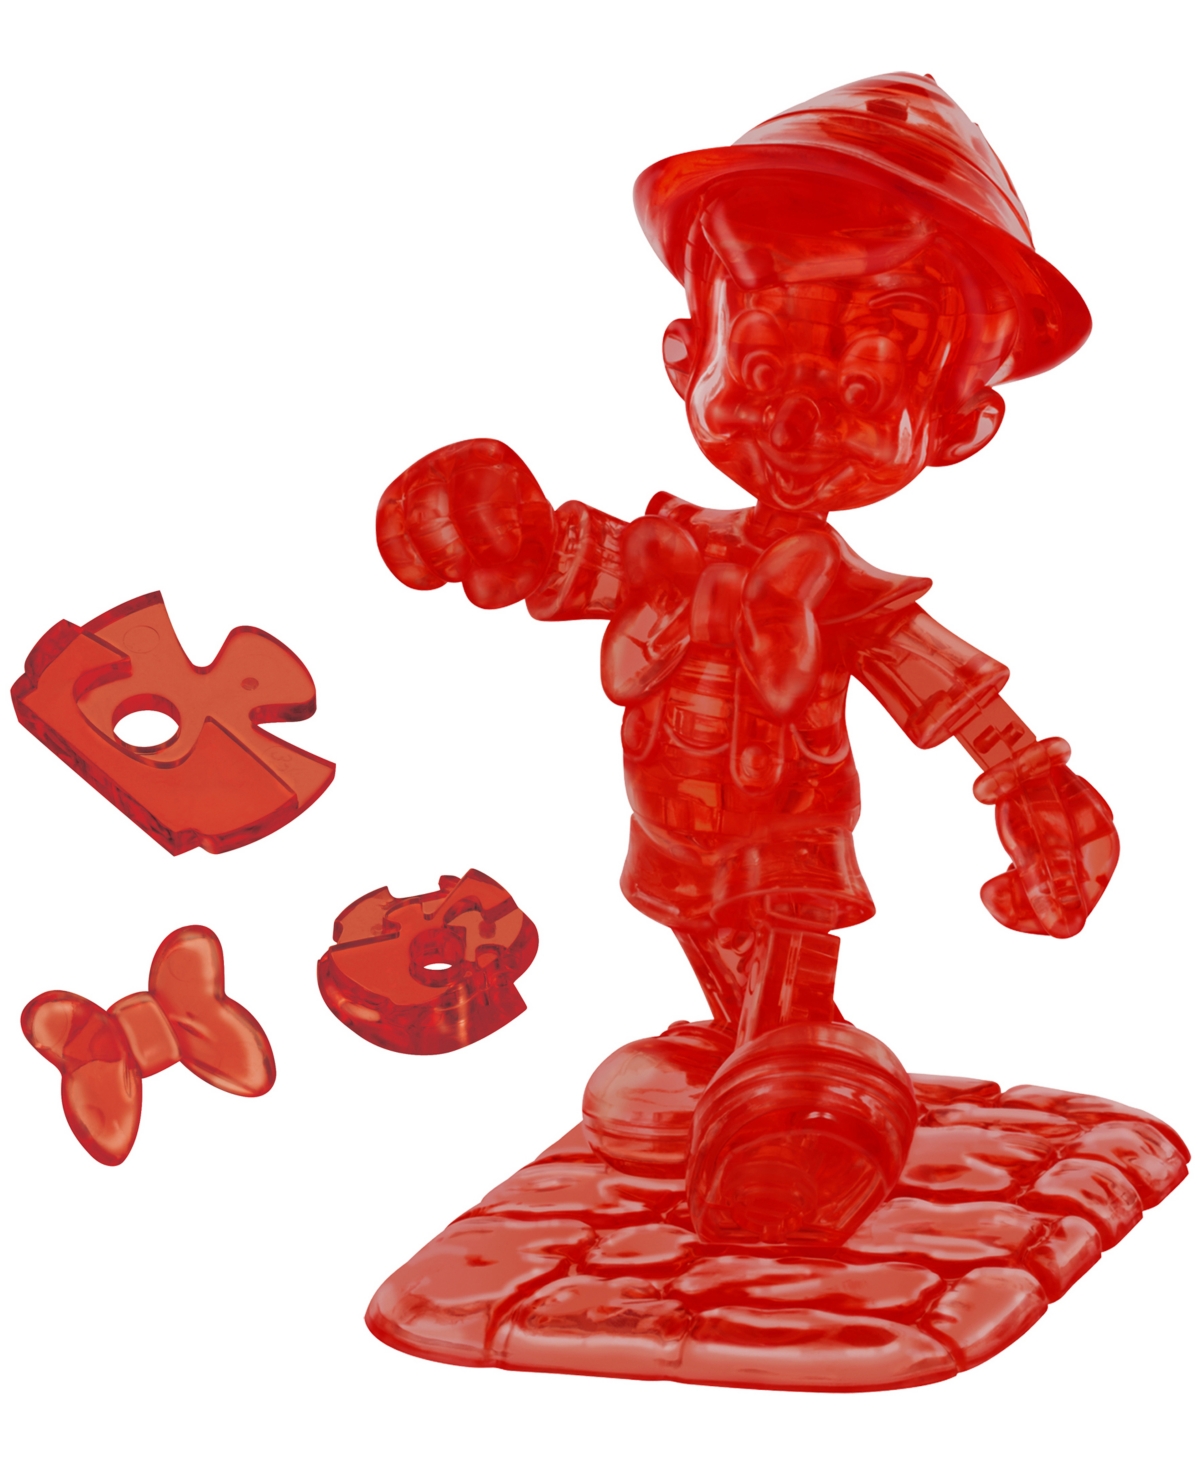 Shop Areyougame 3d Disney Pinocchio Crystal Puzzle Set, 38 Piece In Red